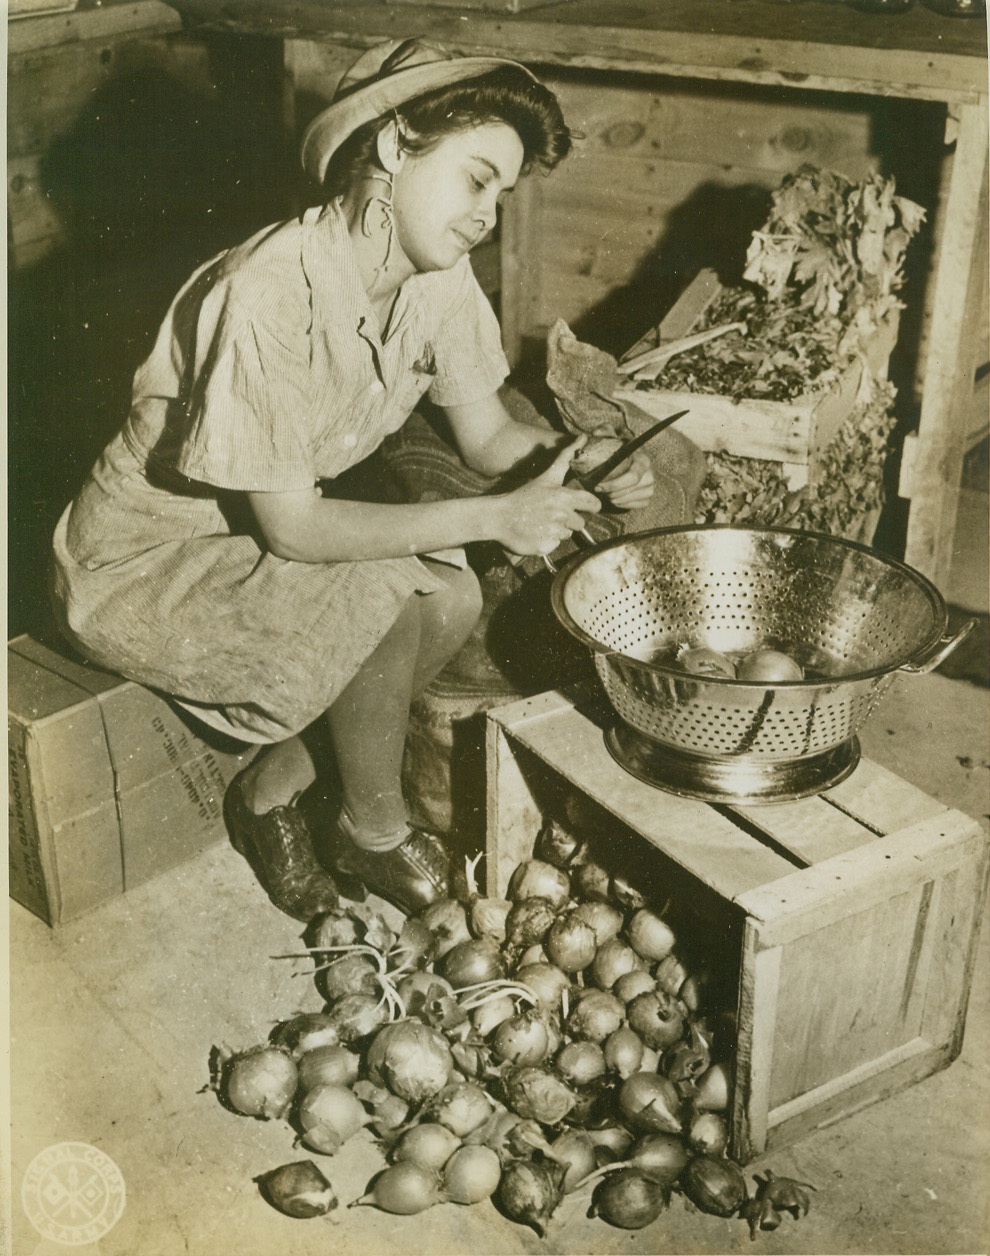 DON’T CRY, LITTLE GIRL, 1/3/1943. FORT DEVENS, MASS. – If there are tears in WAAC Ruth Ballard’s eyes, blame it on the onions. If she joined the Army to escape the kitchen, tho’, she’s a mighty disappointed young lady, because she drew a KP assignment during her first day on duty at Fort Devens. Credit: Signal Corps photo from ACME;